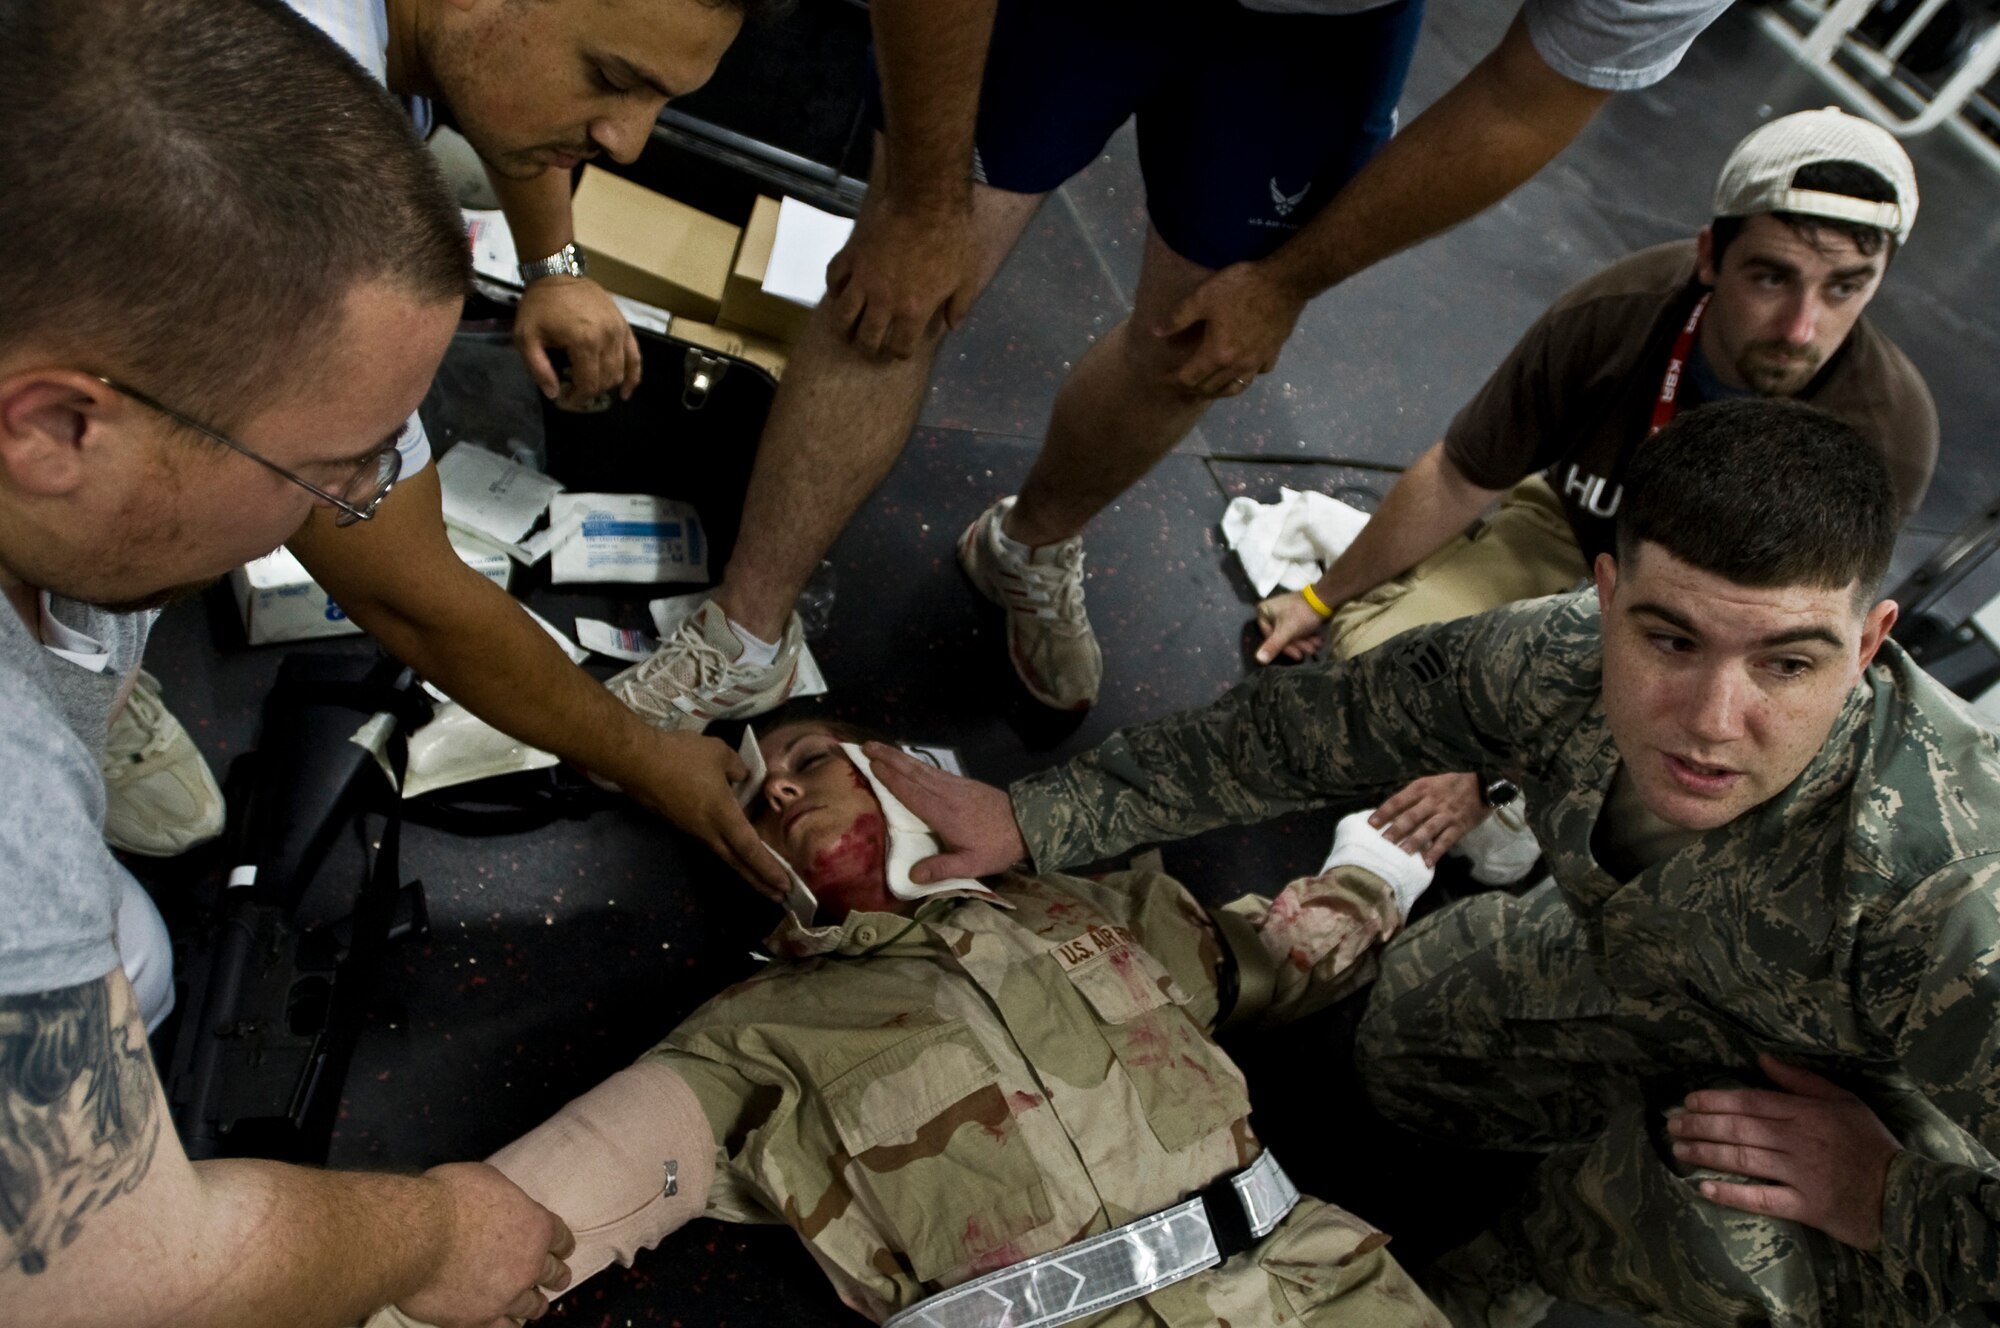 ALI BASE, Iraq -- Airmen and civilian contract employees use self aid buddy care on a victim of an indirect fire attack Oct. 15, 2008. An indirect fire exercise was held here to test the response of nonmilitary and military members. It also tested skills like self aid buddy care and procedures for identifying UXOs. (U.S. Air Force photo/Senior Airman Christopher Griffin)